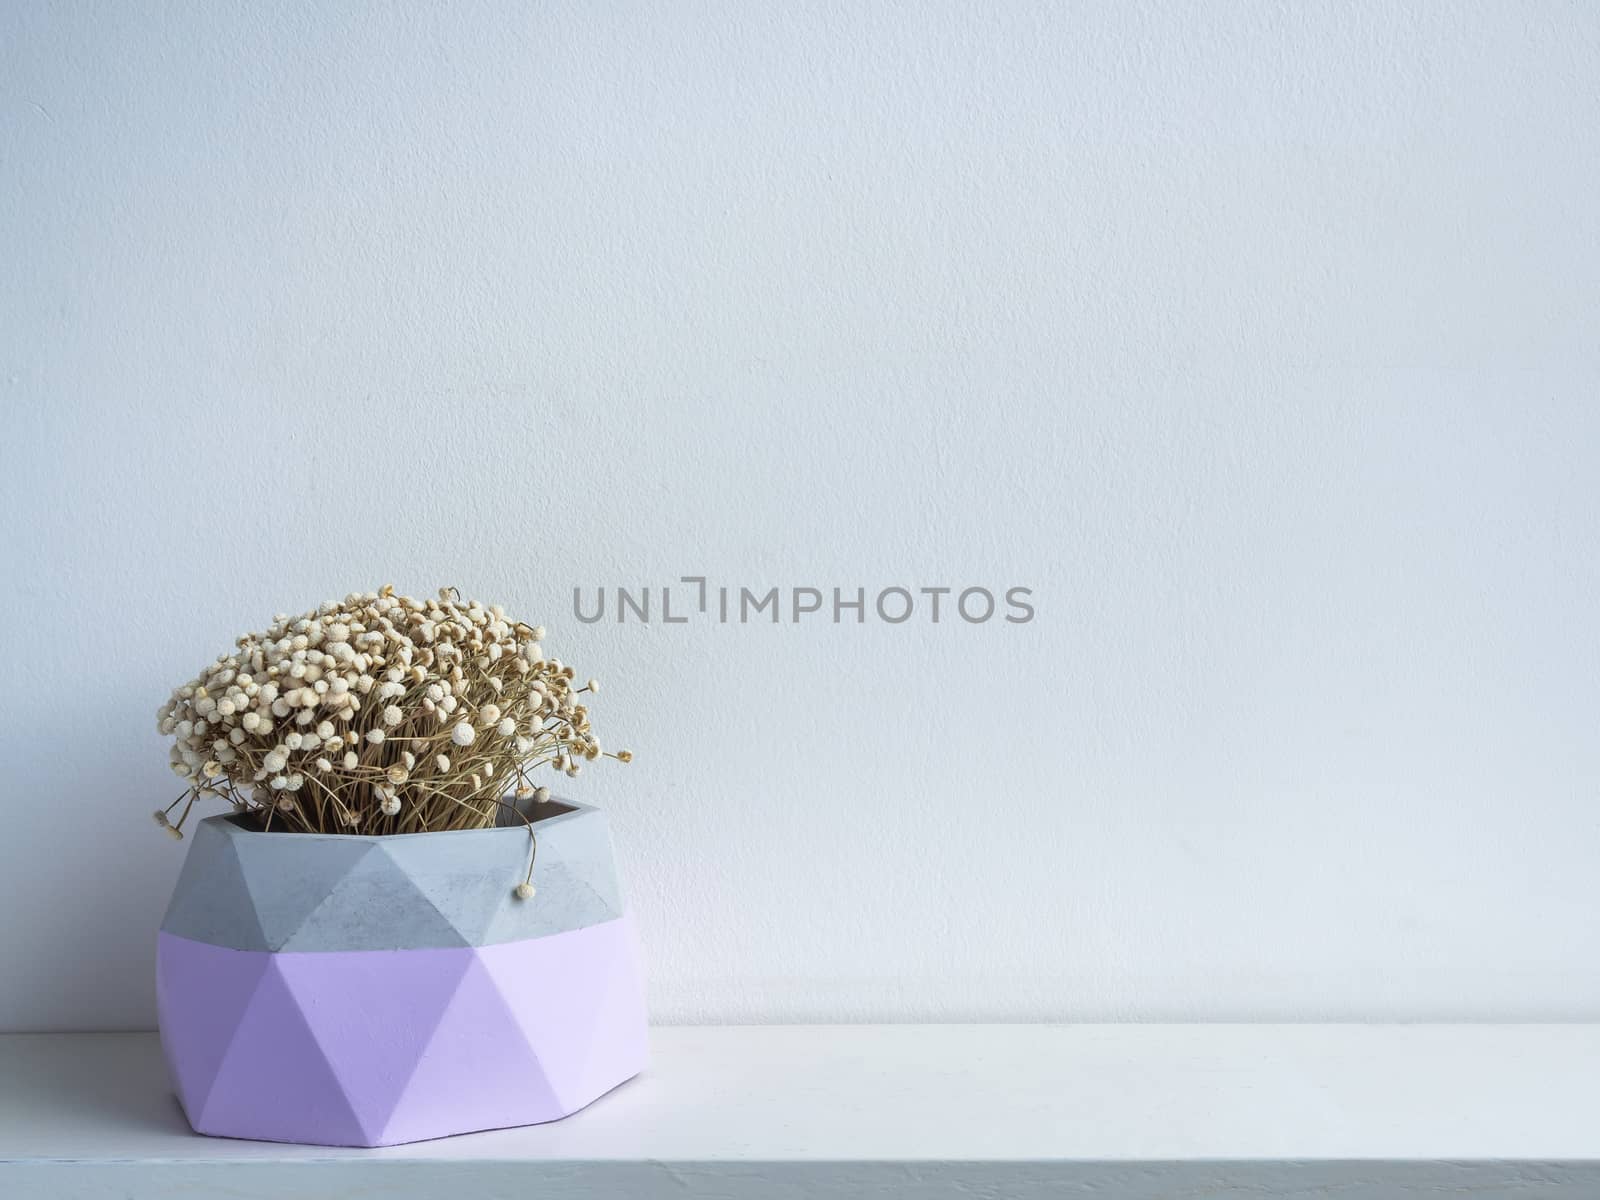 Cactus pot. Concrete pot. Purple modern geometric concrete planters with dry flowers on white wooden shelf isolated on white background with copy space.